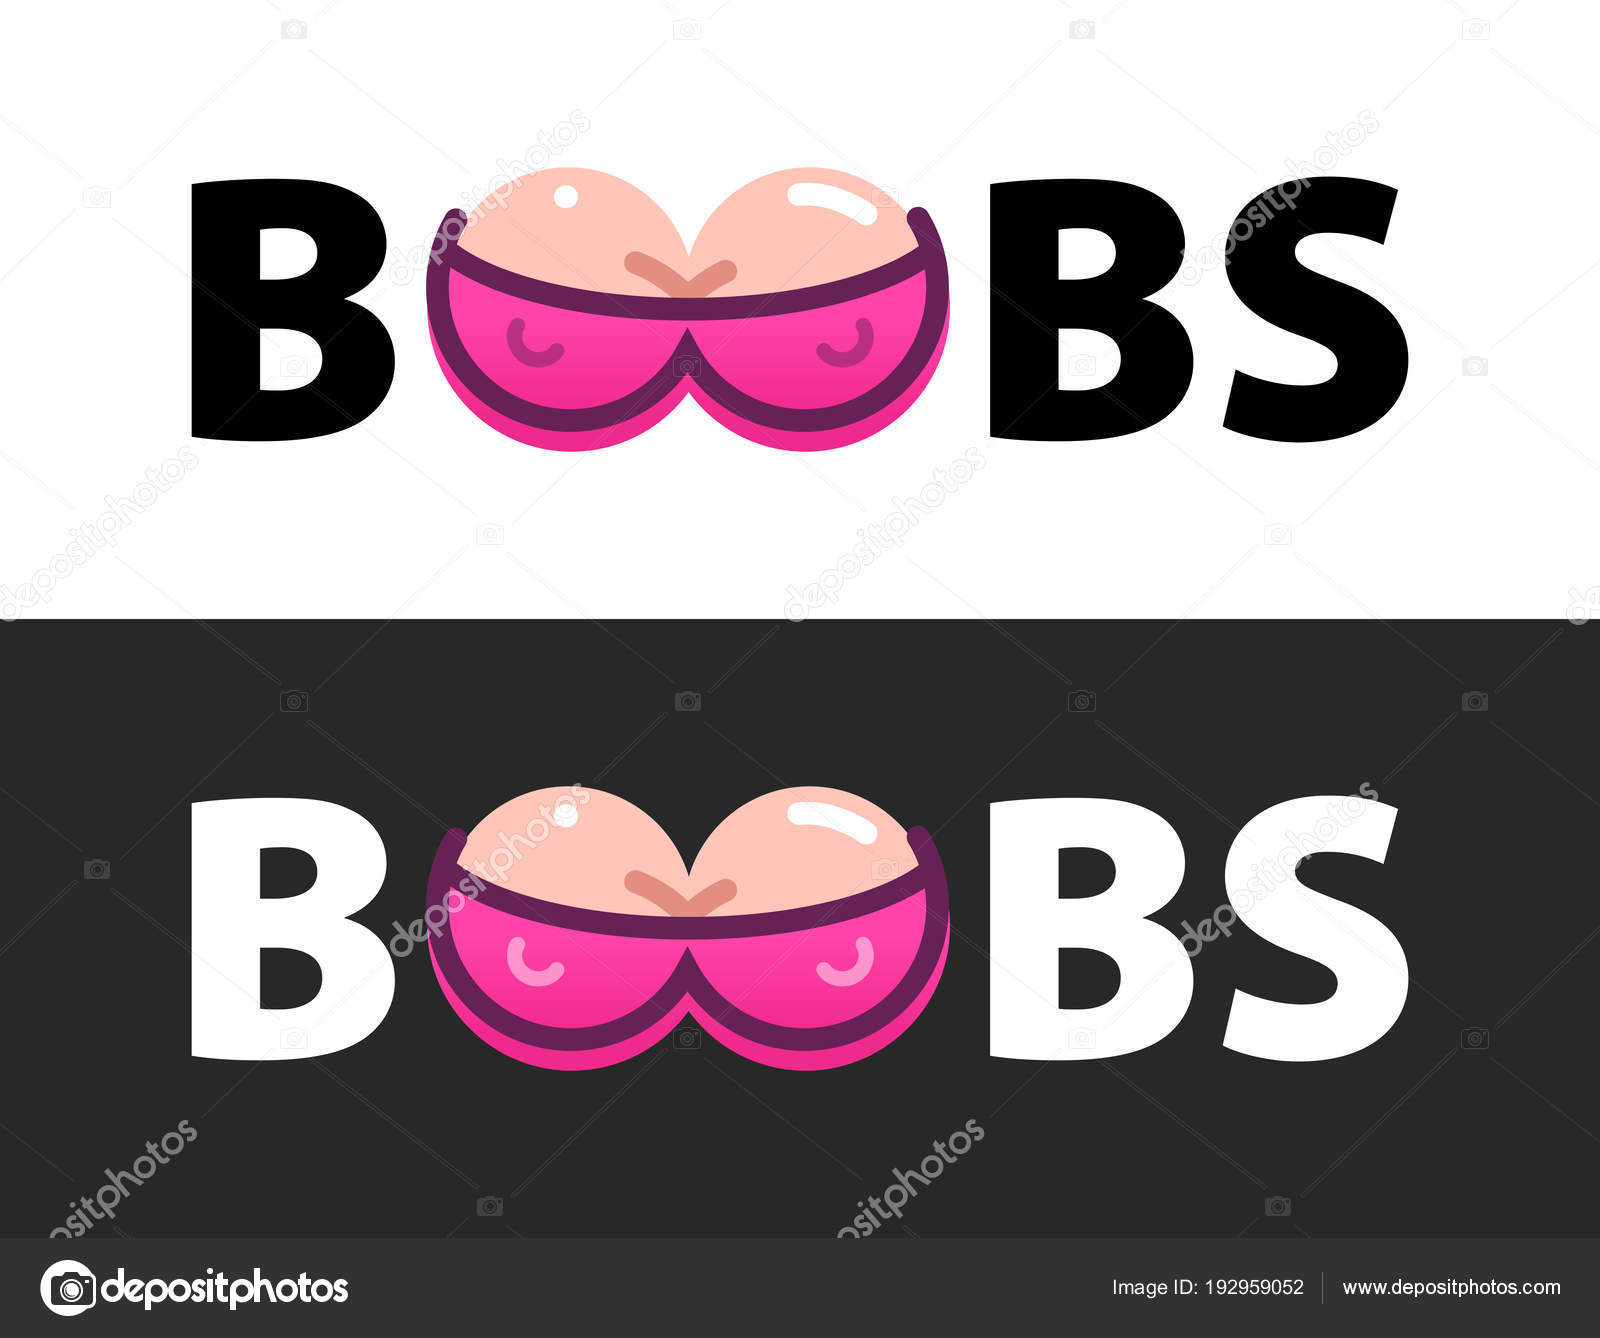 Vector Logo with Boobs in text isolated on white background - Erotic Illust...